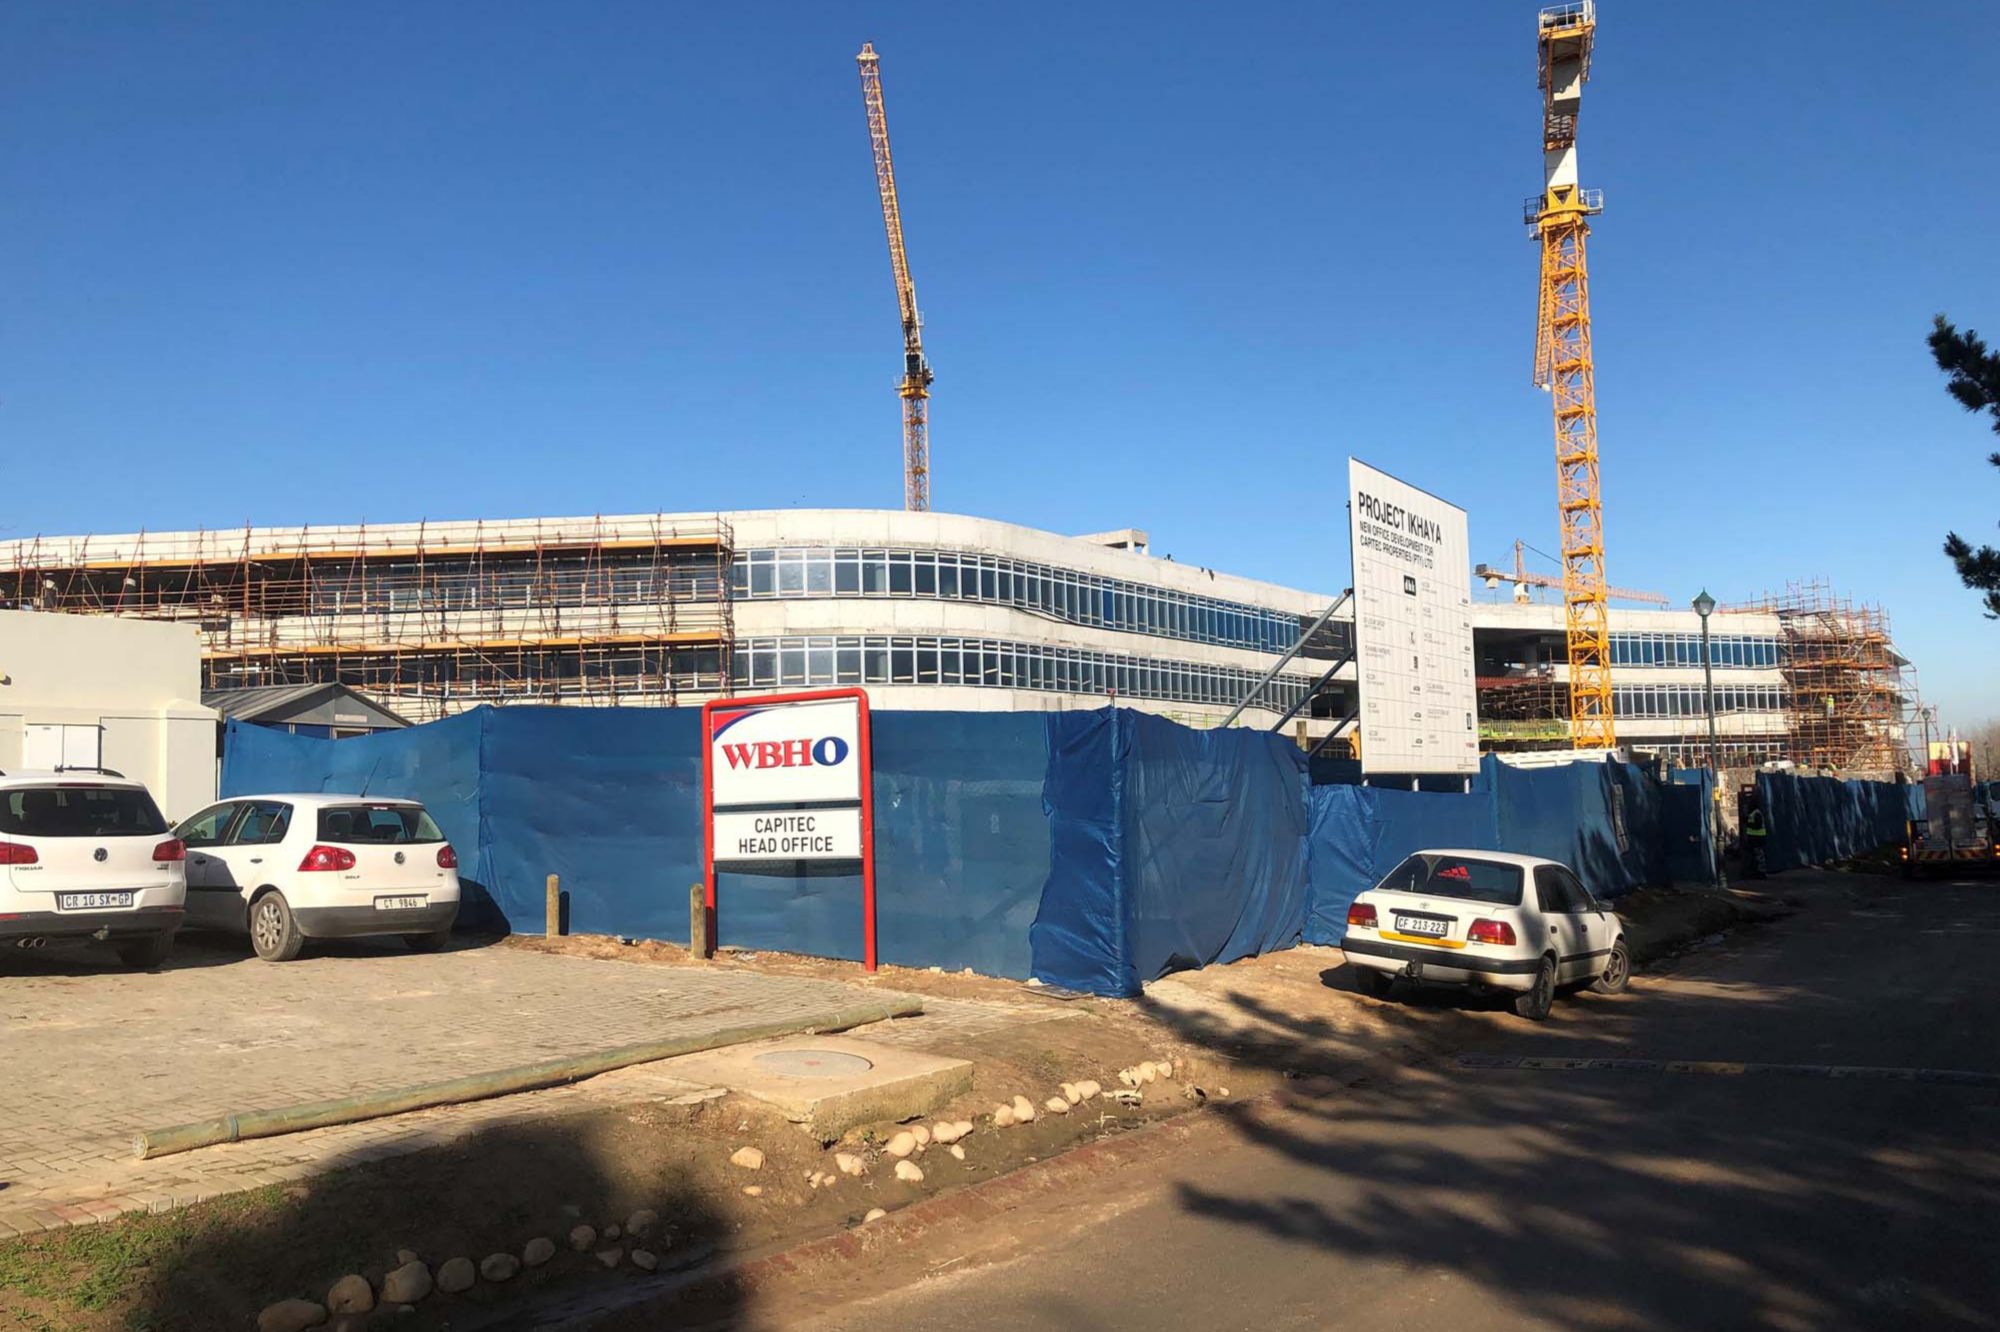 Structural Glazing done at new Capitec HQ in Stellenbosch, Cape Town